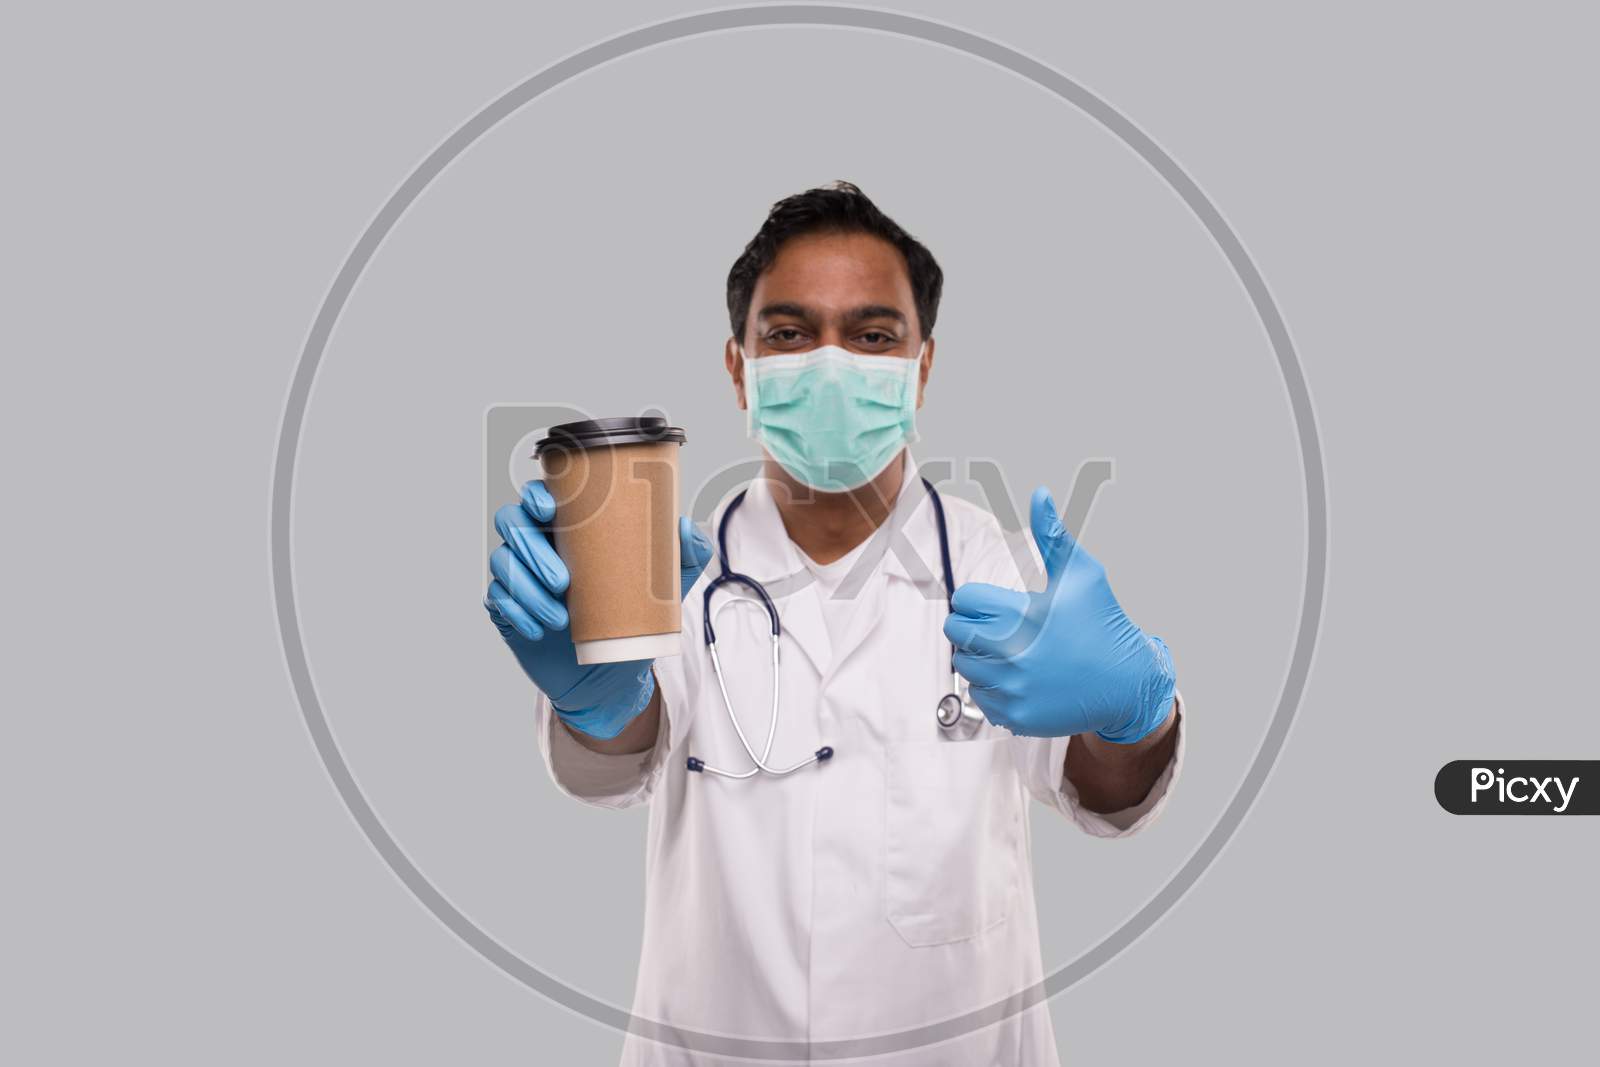 Indian Man Doctor Holding Coffee Take Away Cup Wearing Medical Mask And Gloves Showing Thumb Up Isolated. Indian Doctor Holding Coffee To Go Cup.